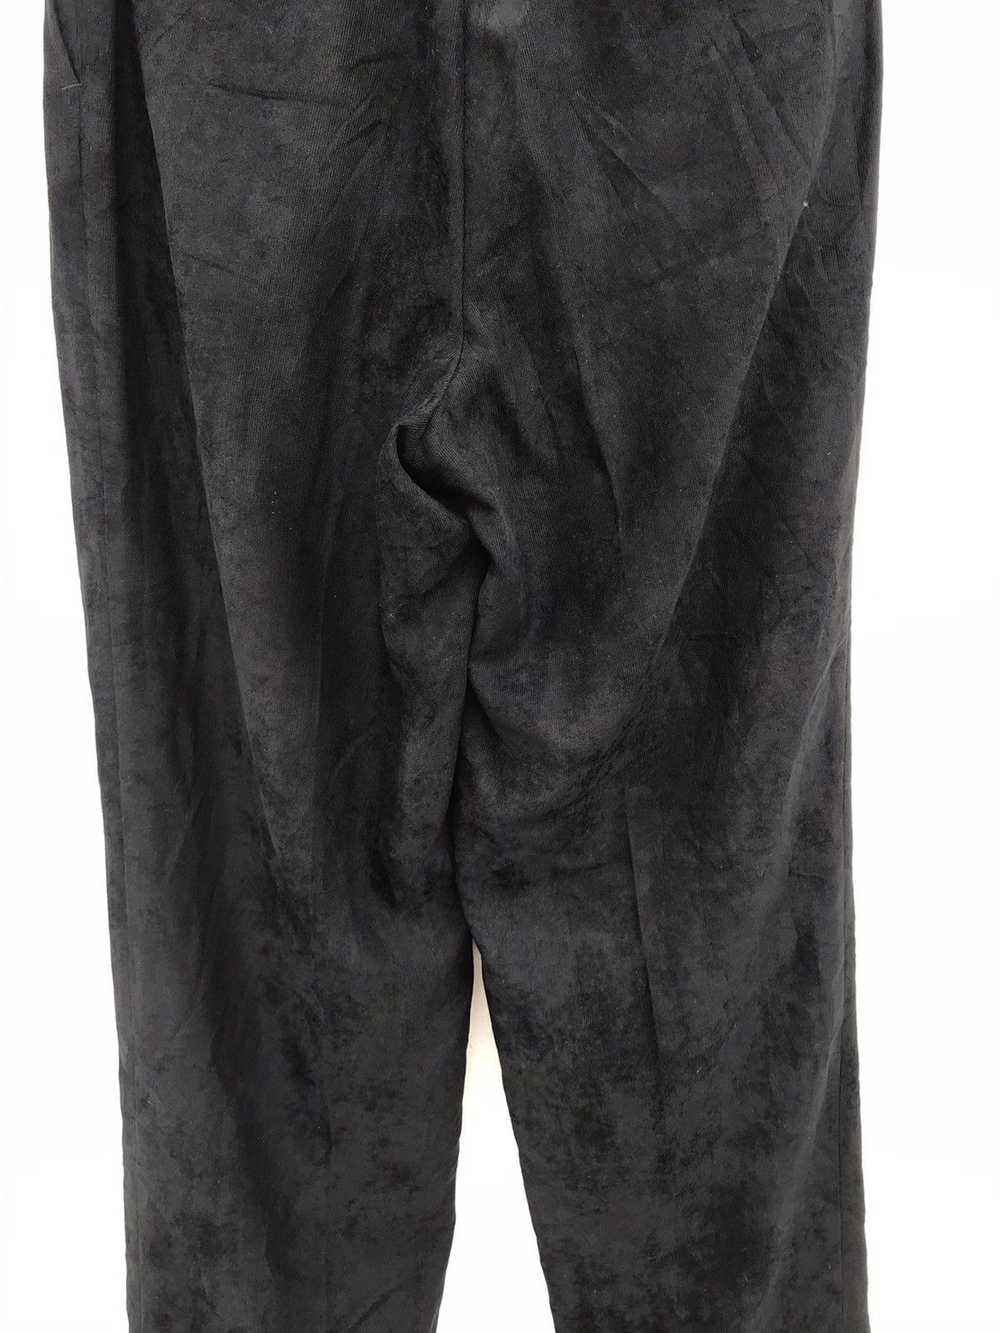 Japanese Brand Marie Claire Corduroy Pants - image 7